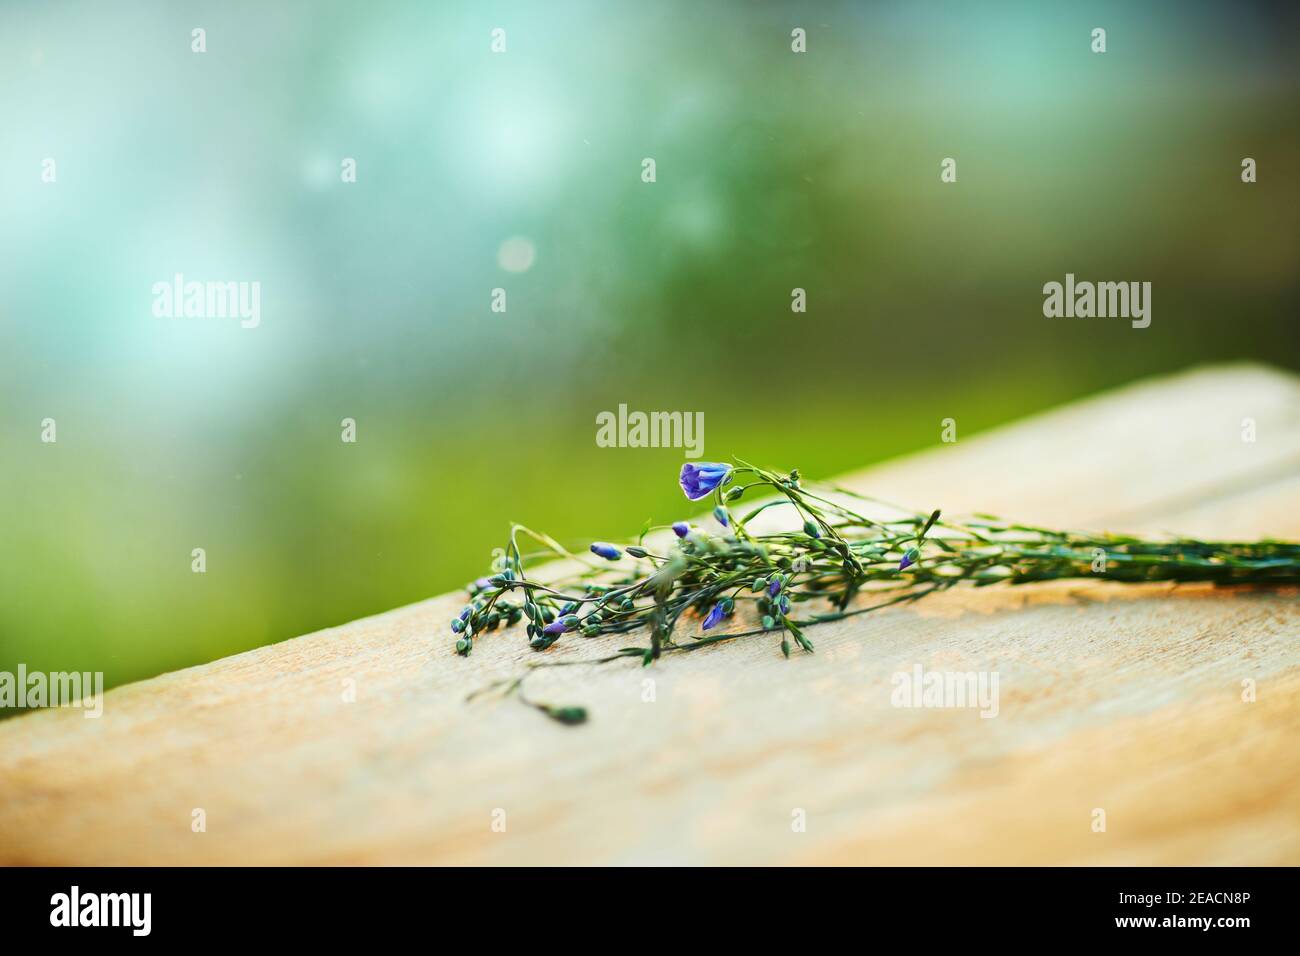 Flax (Linum usitatissimum), also known as common flax or linseed, is lying on a wooden table on a green blurred background Stock Photo